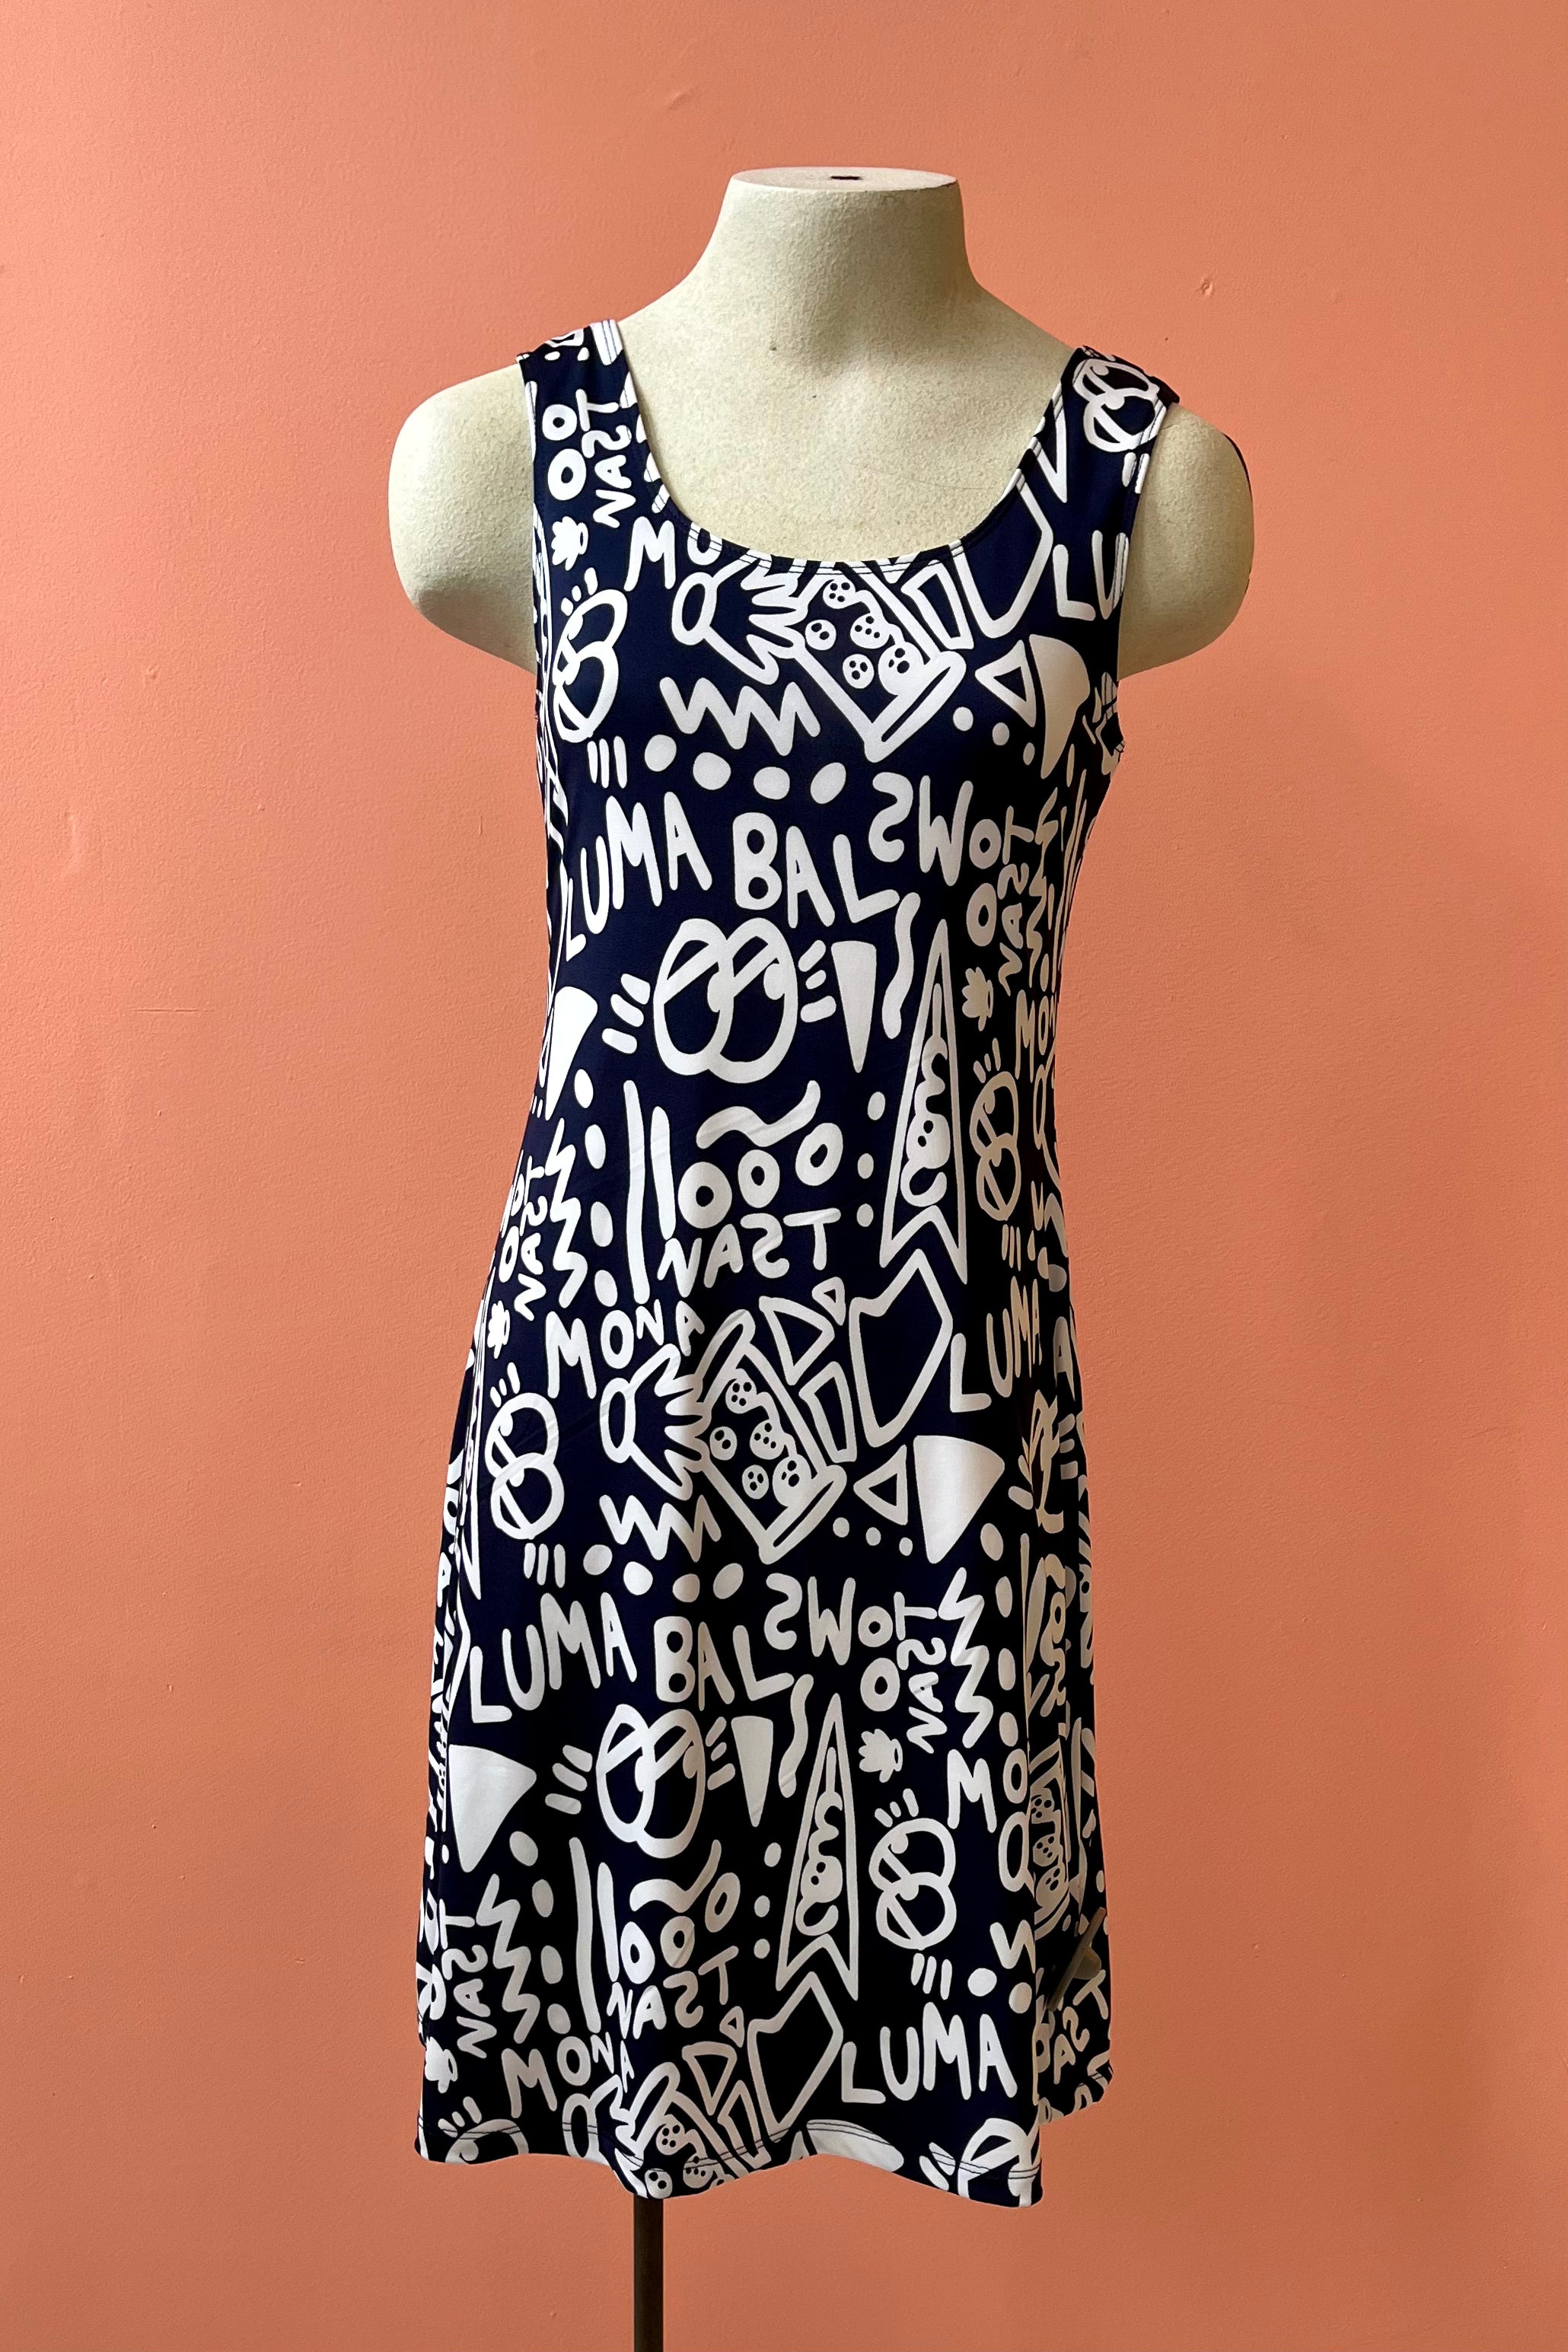 Phillips Dress by Yul Voy, black and white graffiti print, scooped neck front and back, tank dress, wide straps, fit and flare shape, above the knee, sizes XS to XXL, made in Montreal